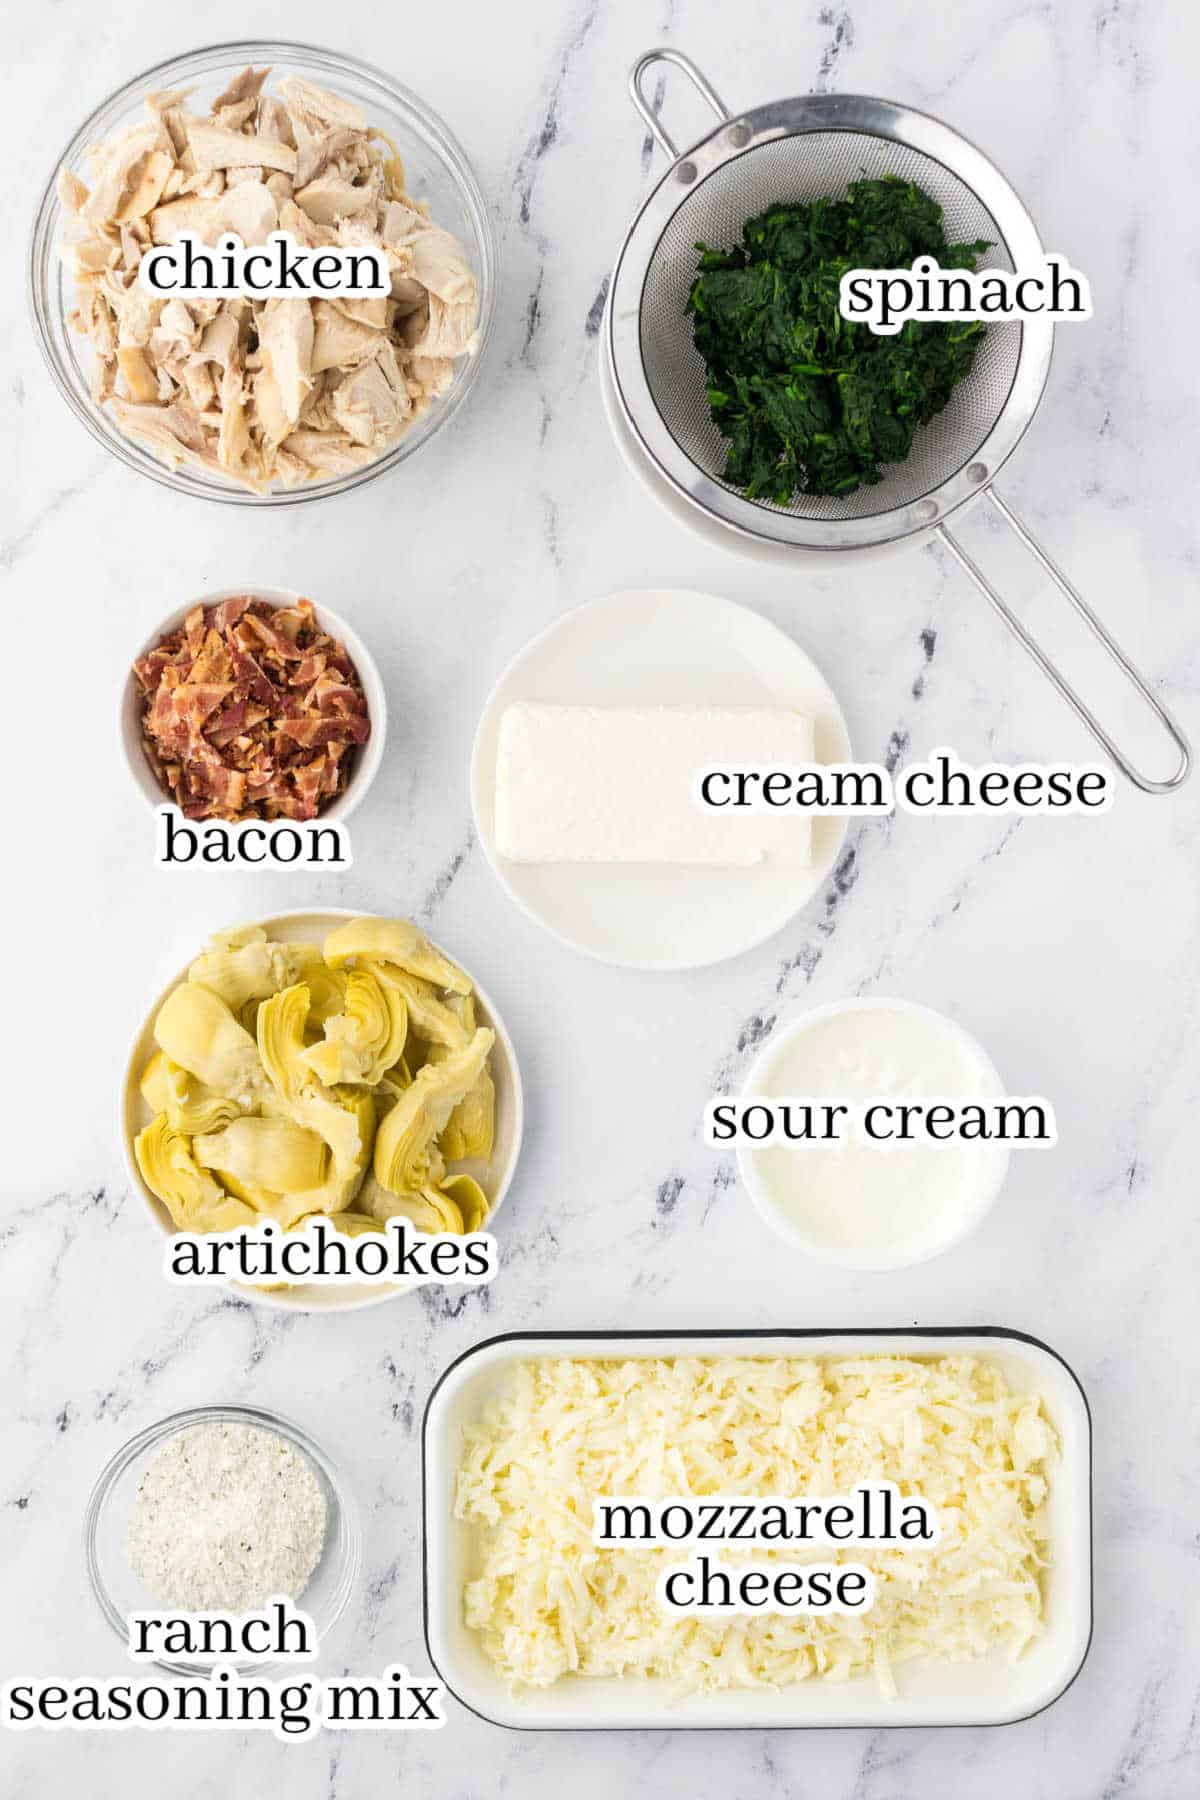 Ingredients to make the casserole dish with print overlay for clarification.